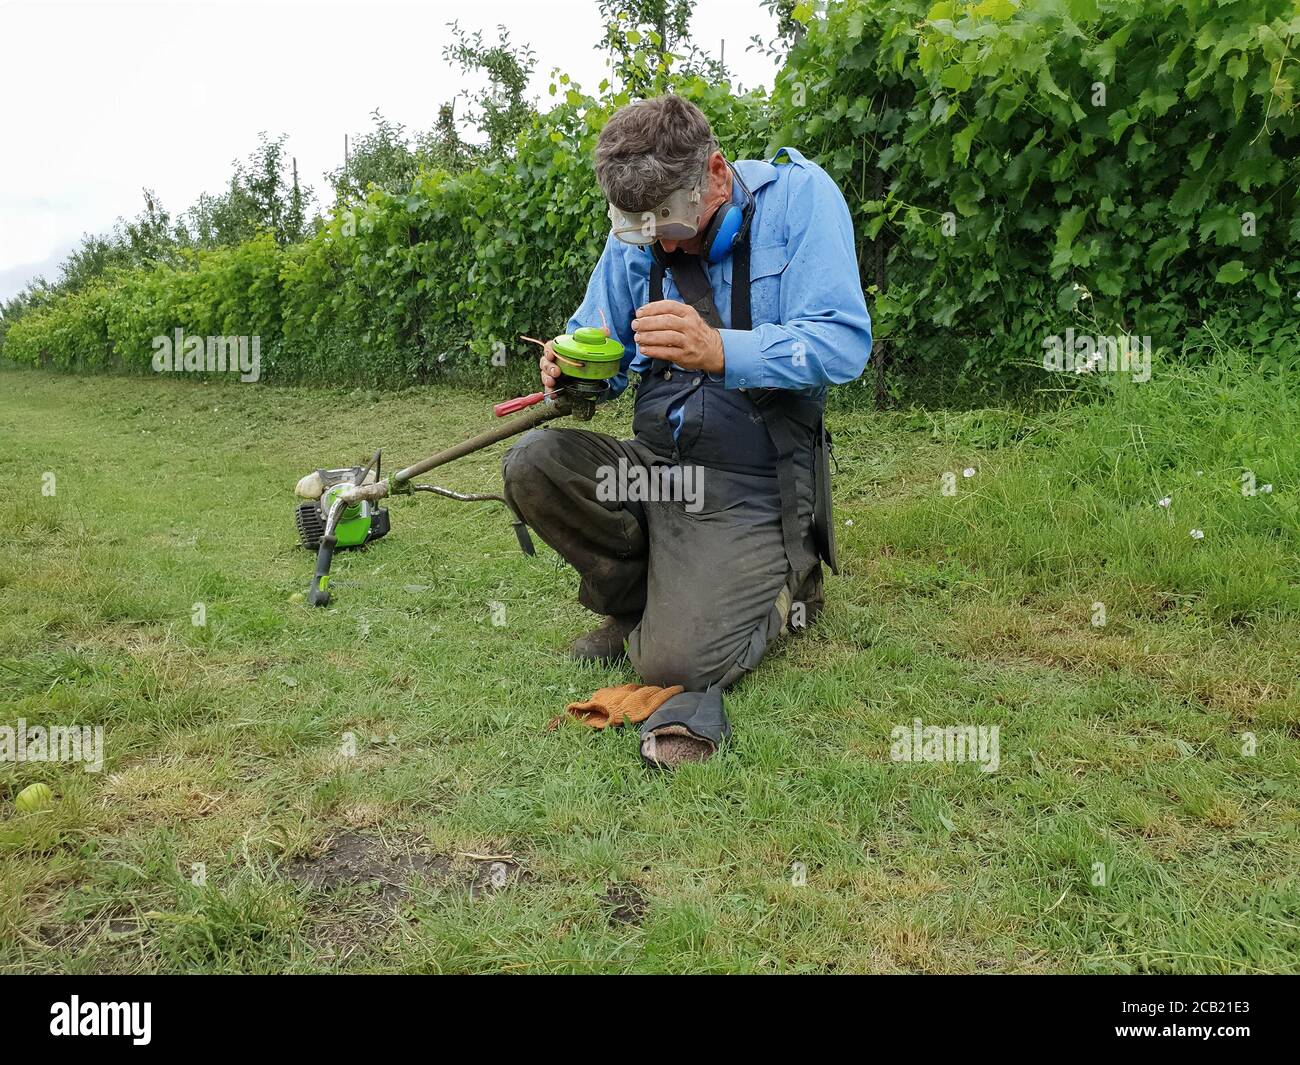 Senior man with brush cutter on the lawn against the background of bushes in workwear and goggles Stock Photo